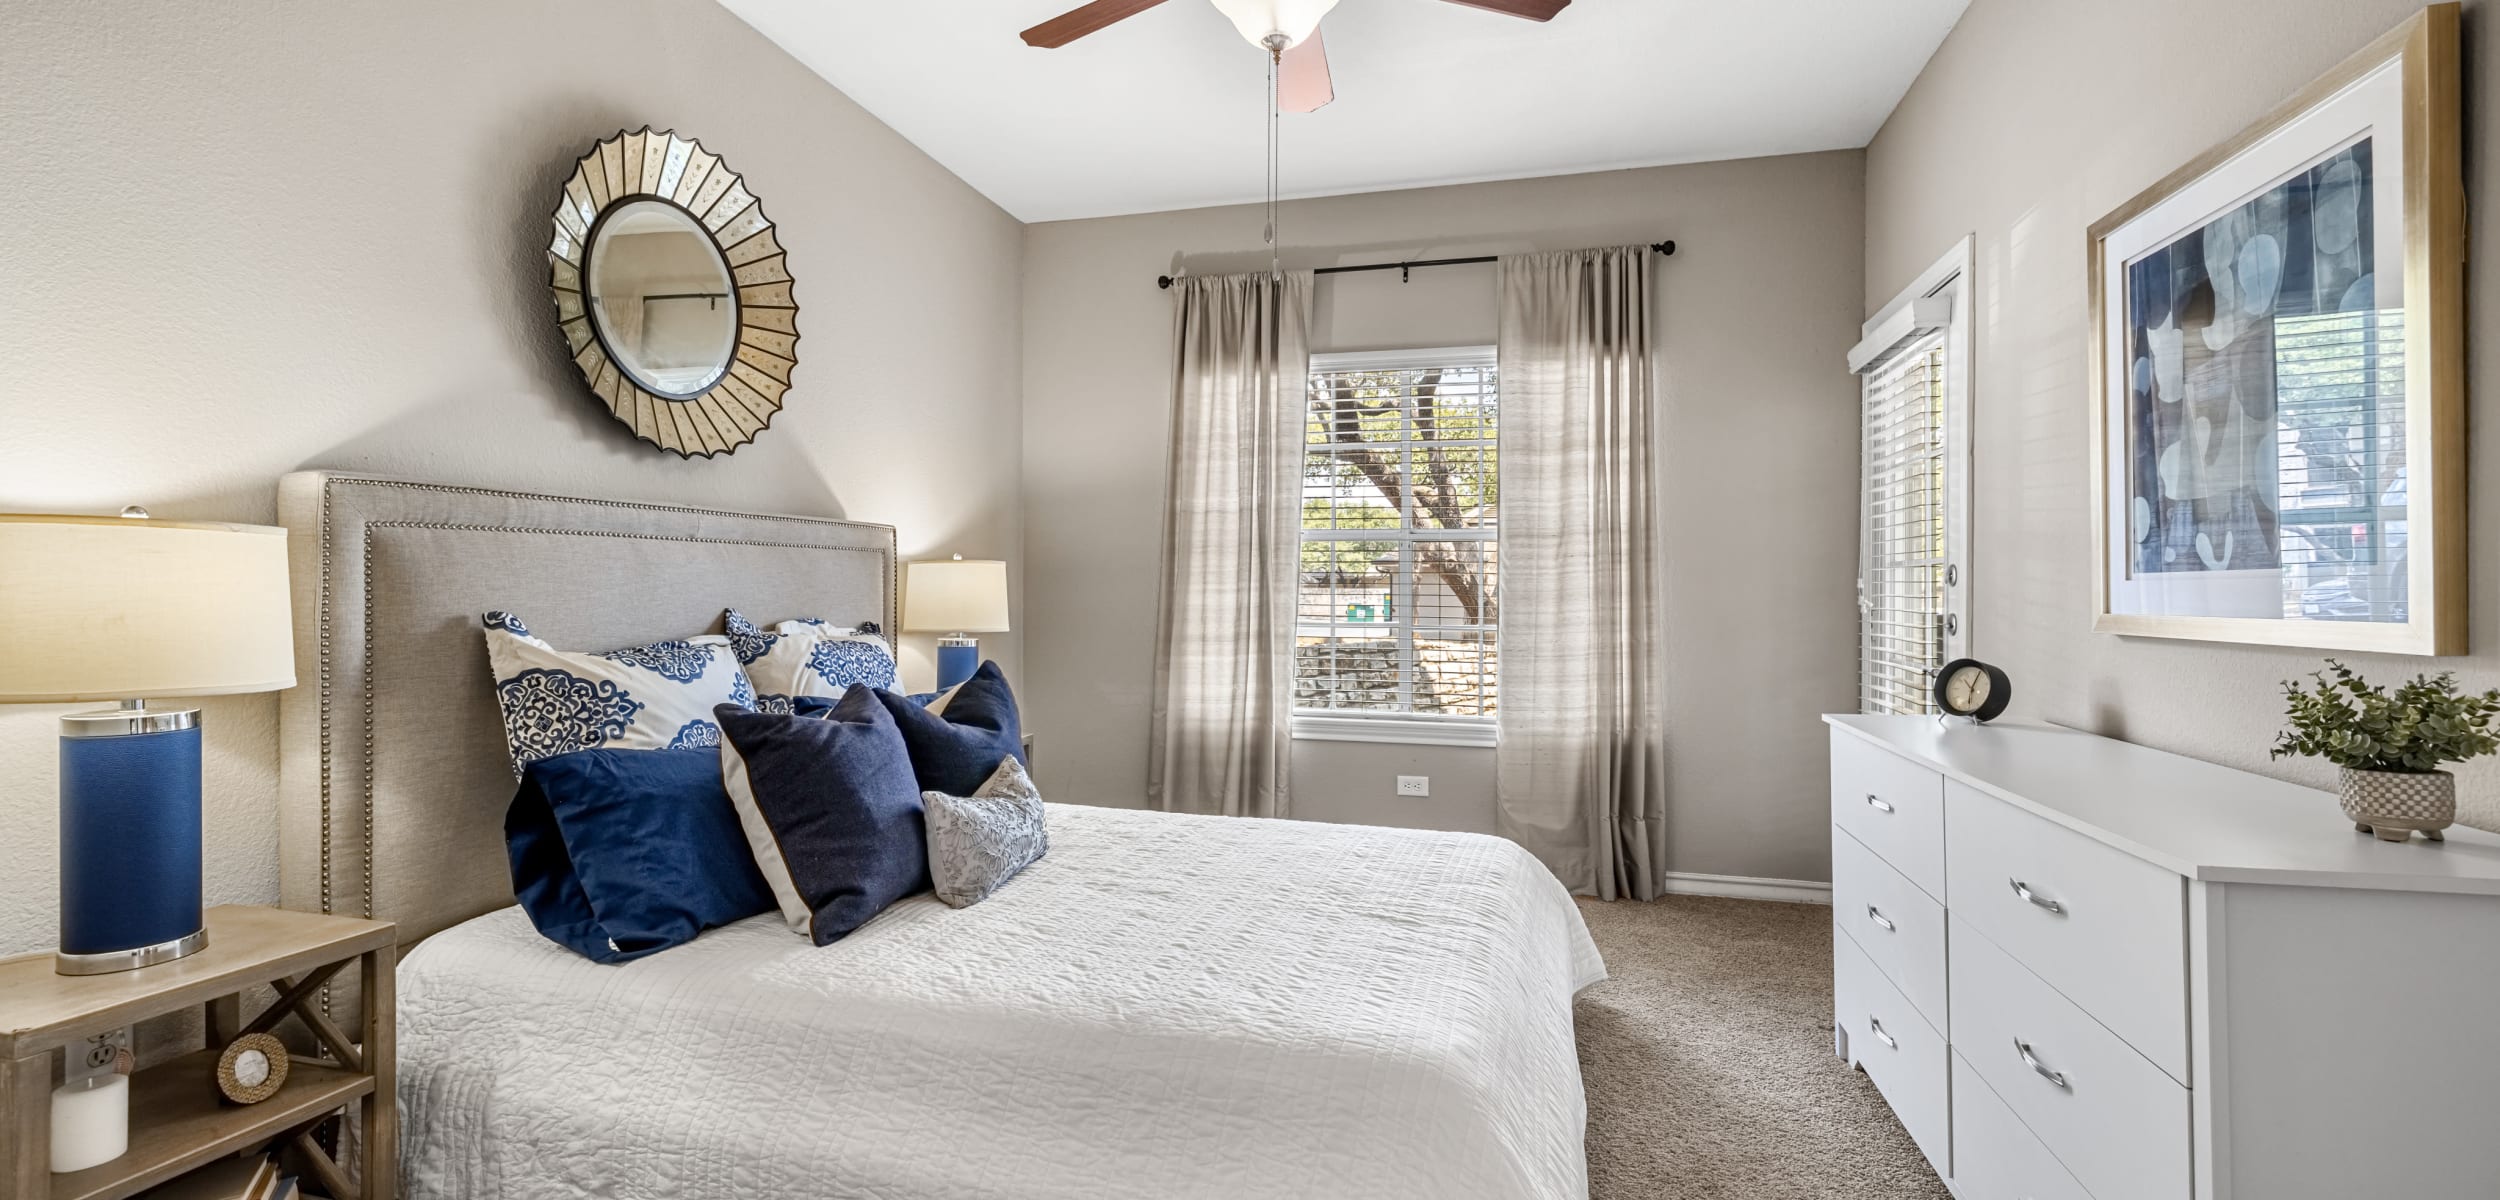 Bedroom with a ceiling fan at Marquis at Deerfield in San Antonio, Texas